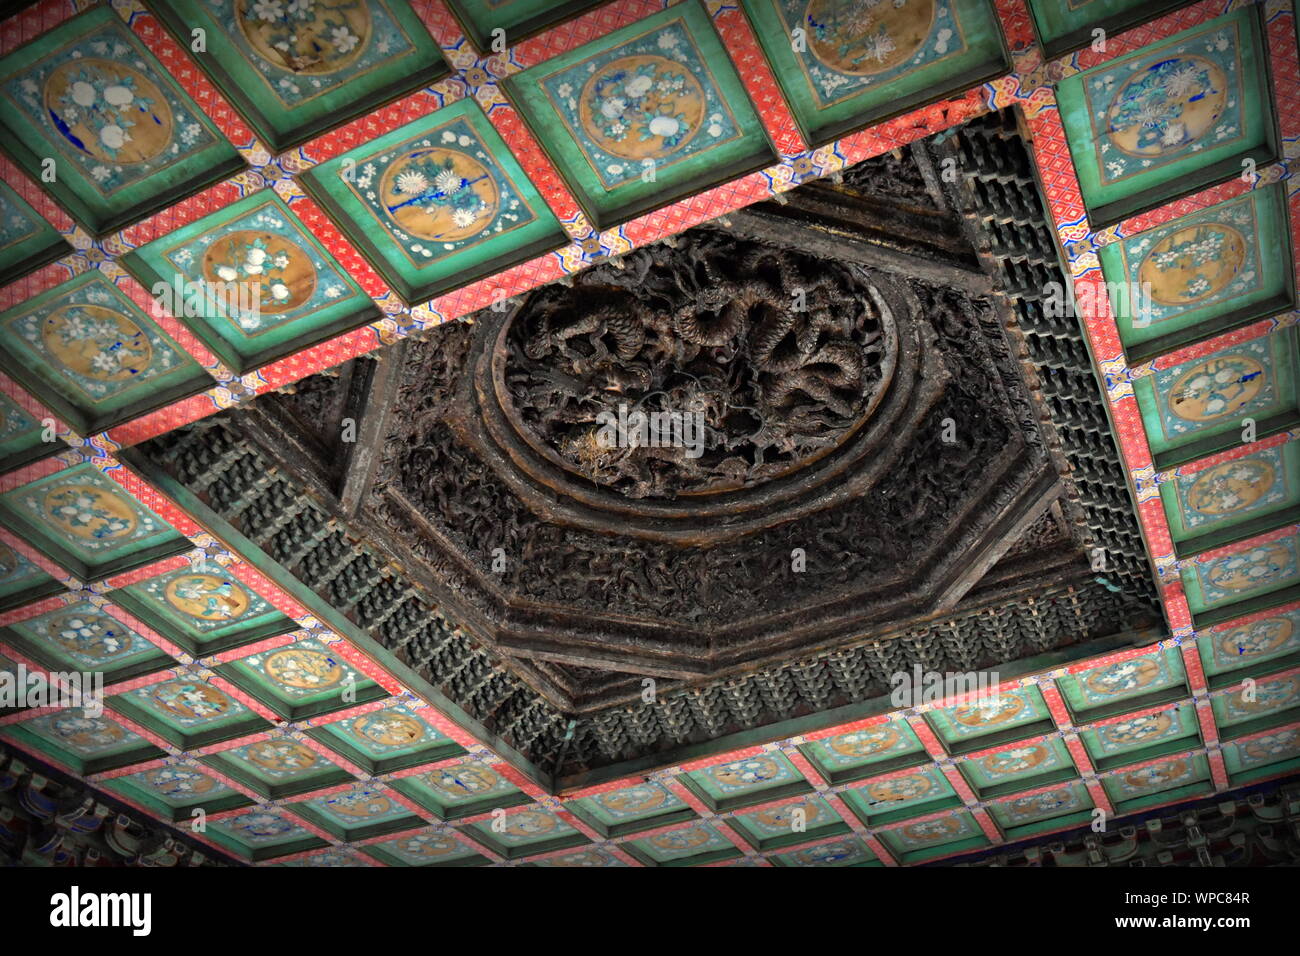 Old Chinese wooden dragon and beautifully colored ceiling of Fubi pavilion of the Forbidden City palace imperial garden, Beijing, China Stock Photo